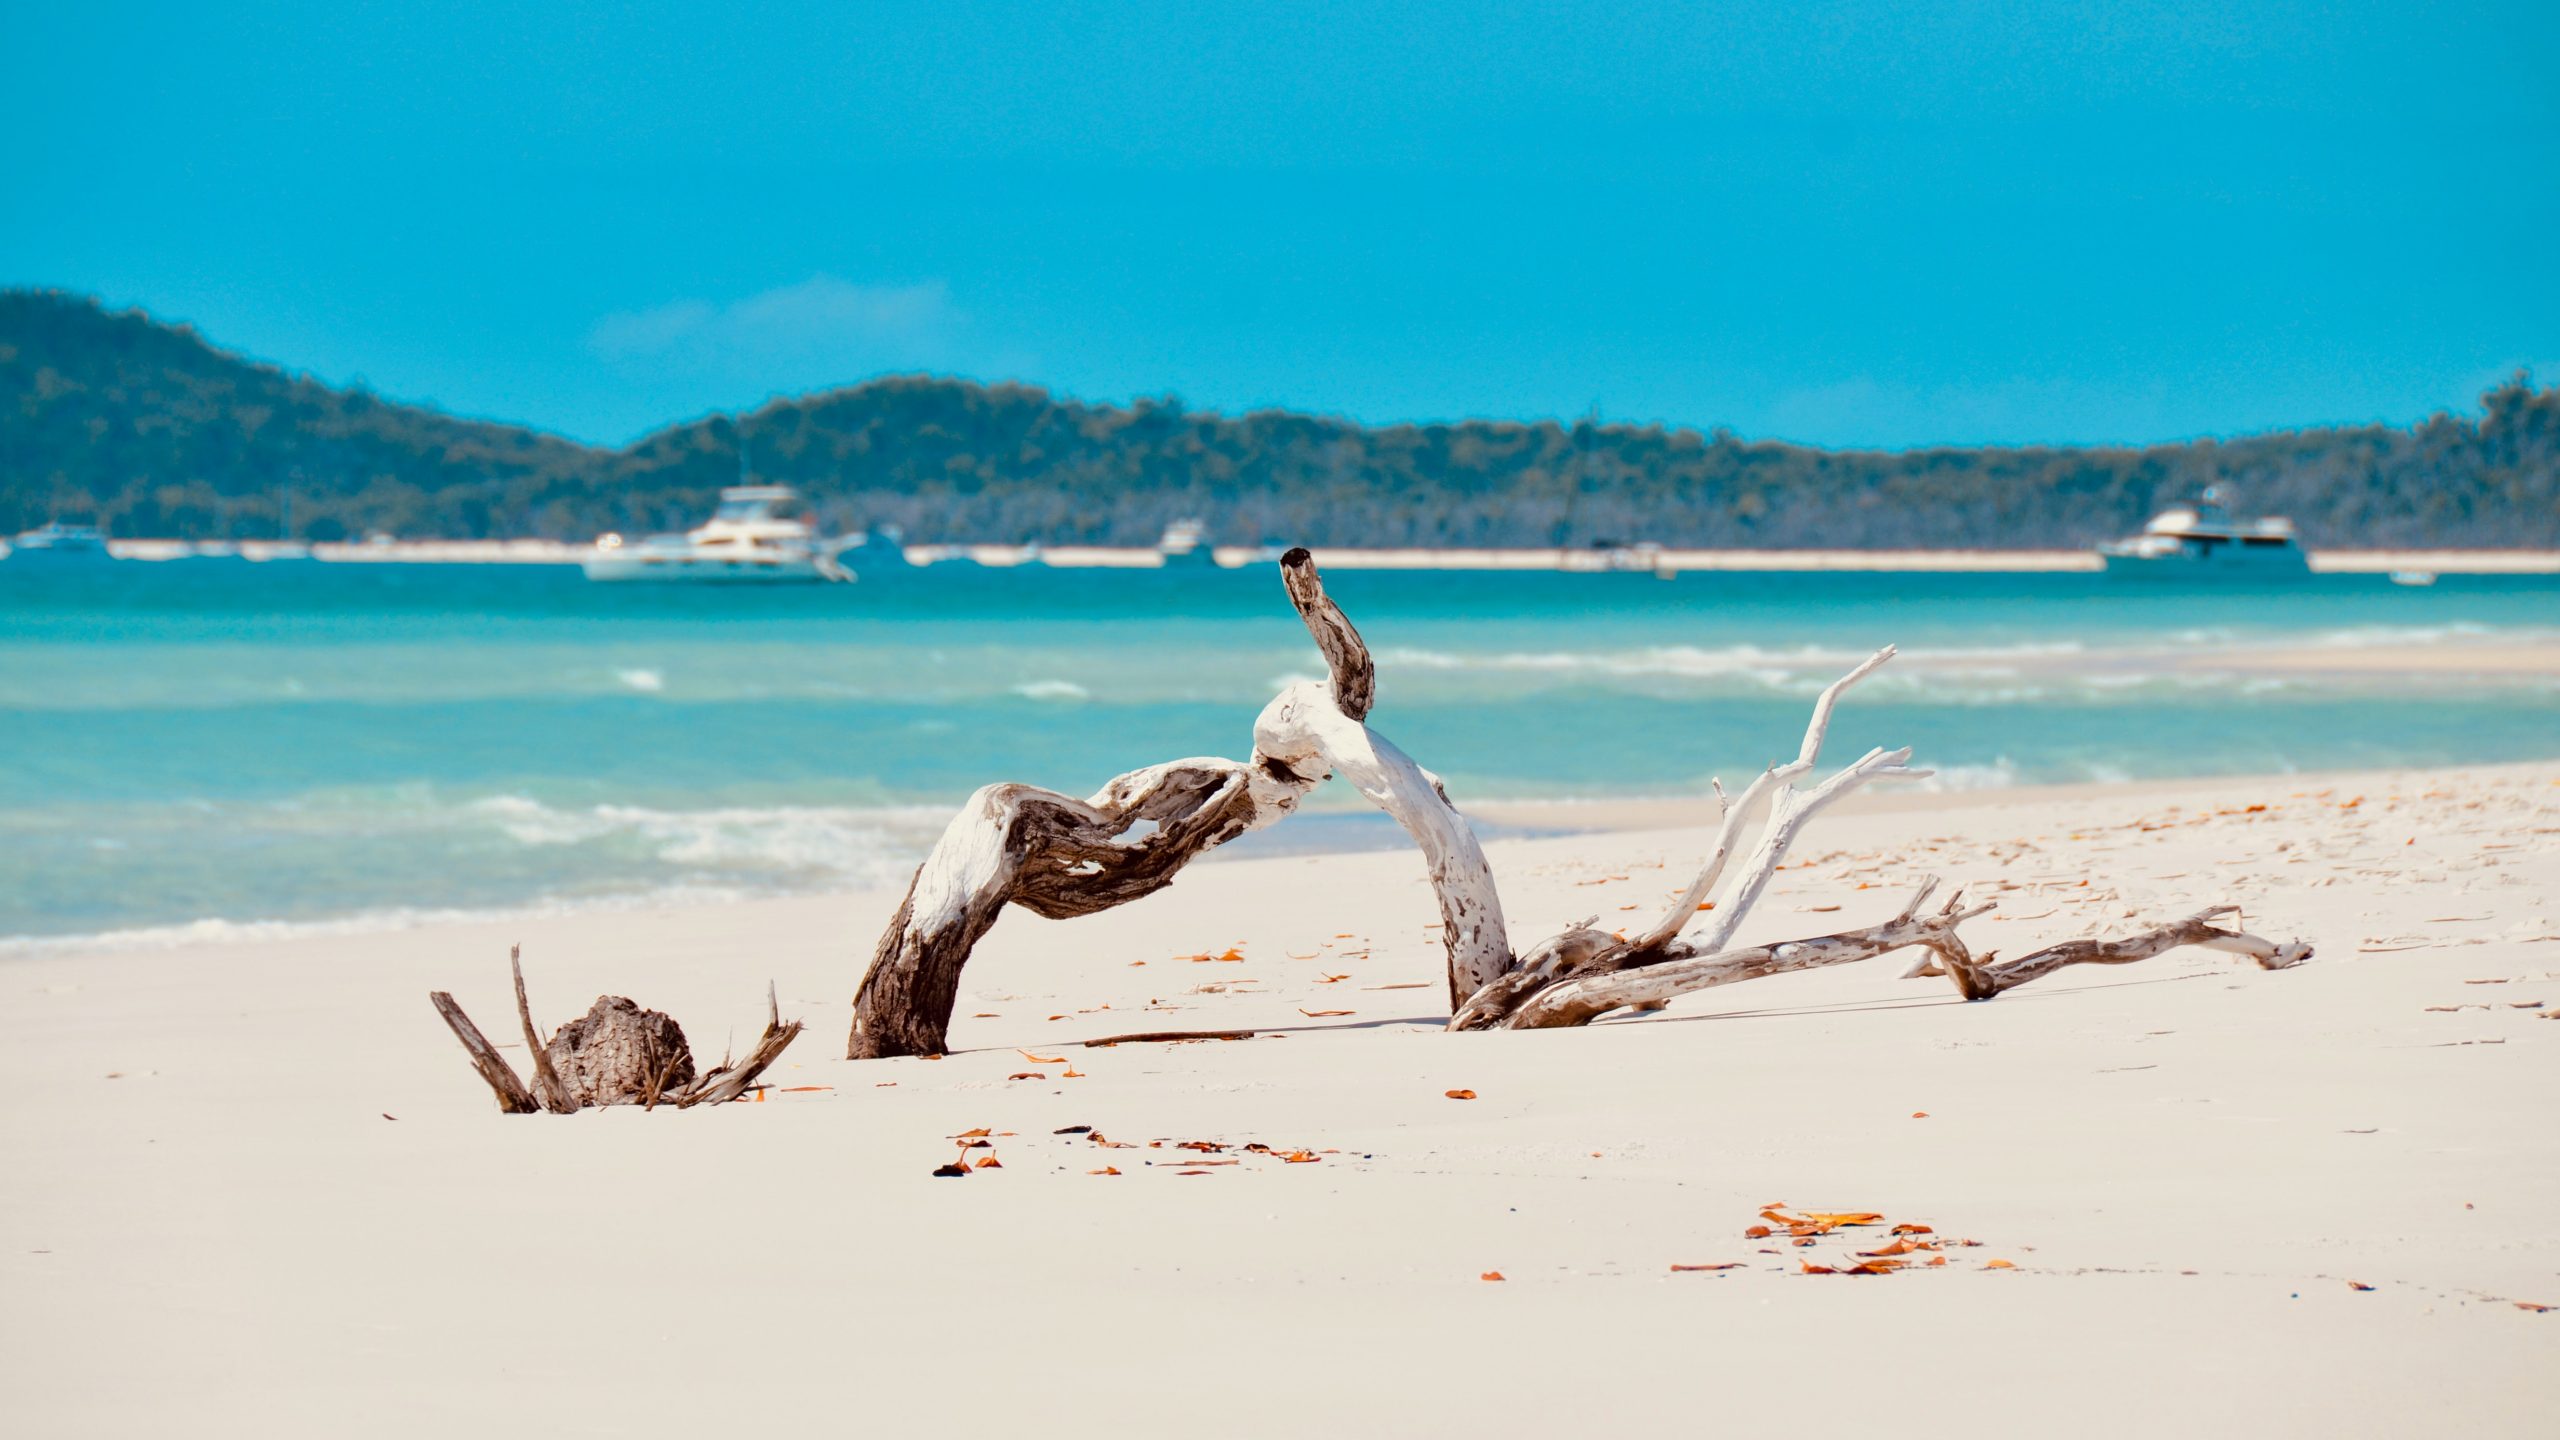 Driftwood on Whitehaven Beach in the Whitsunday Islands, Queensland Australia